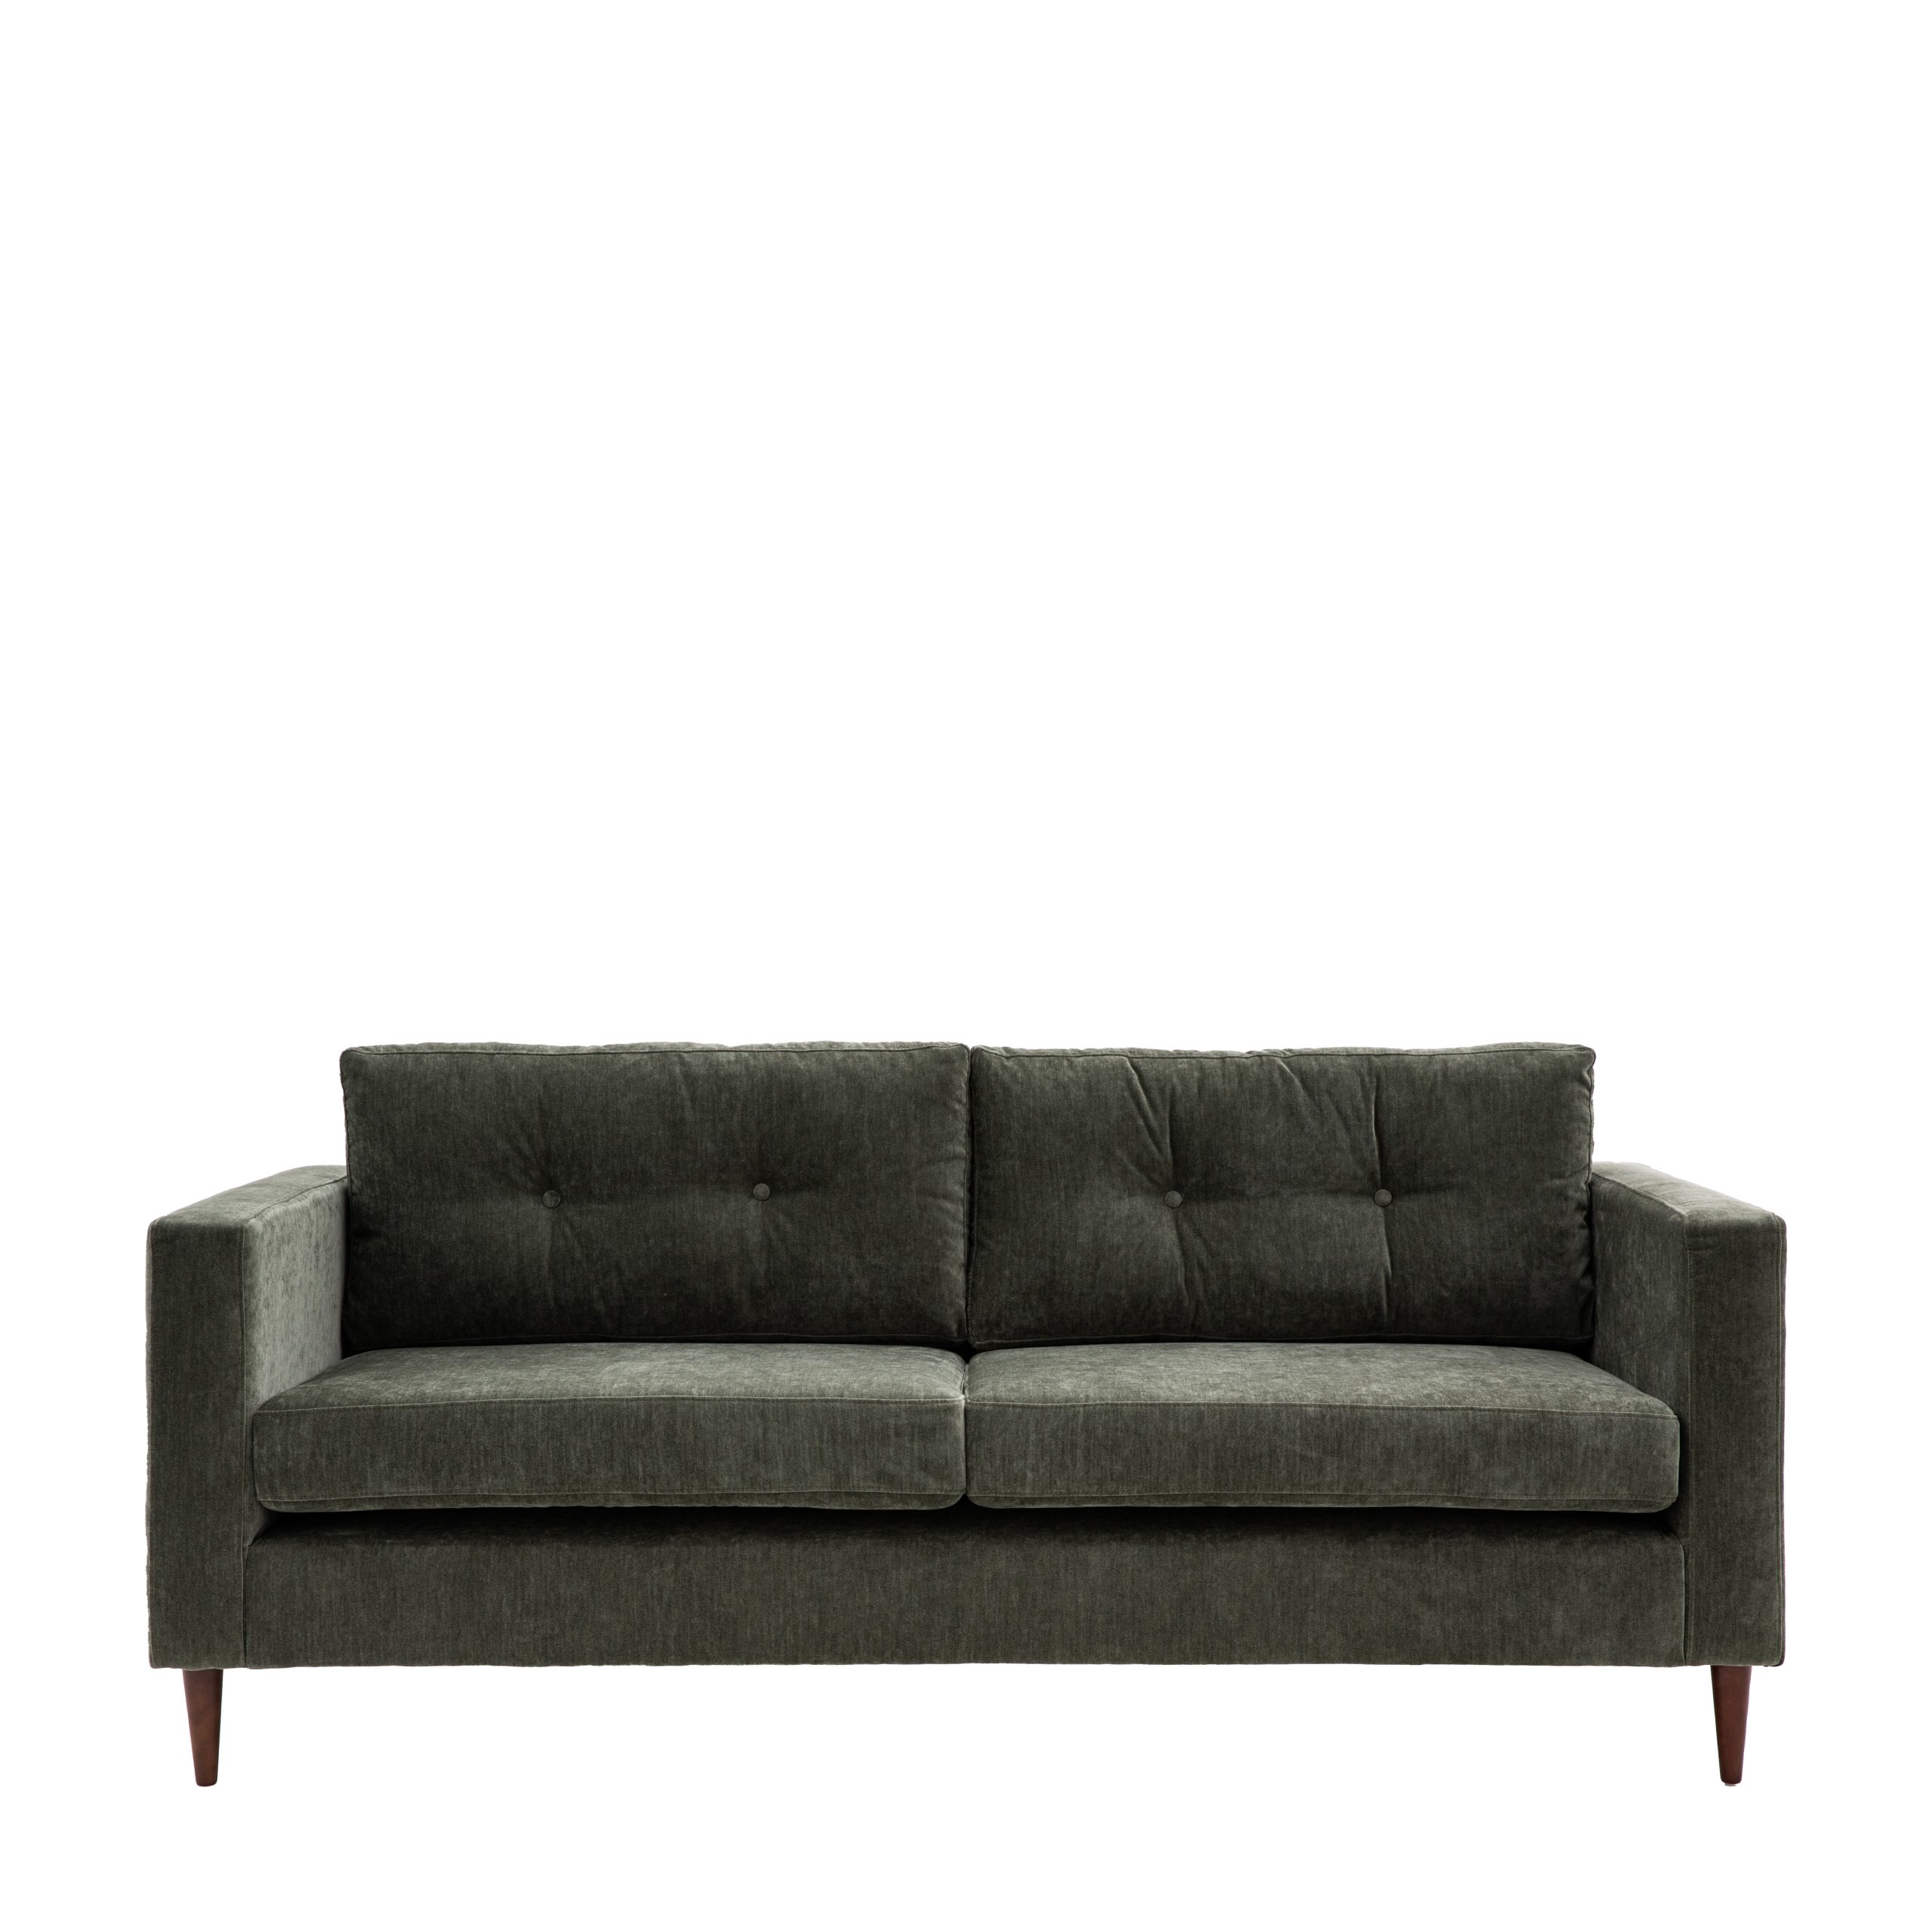 Gallery Direct Whitwell Sofa 3 Seater Forest